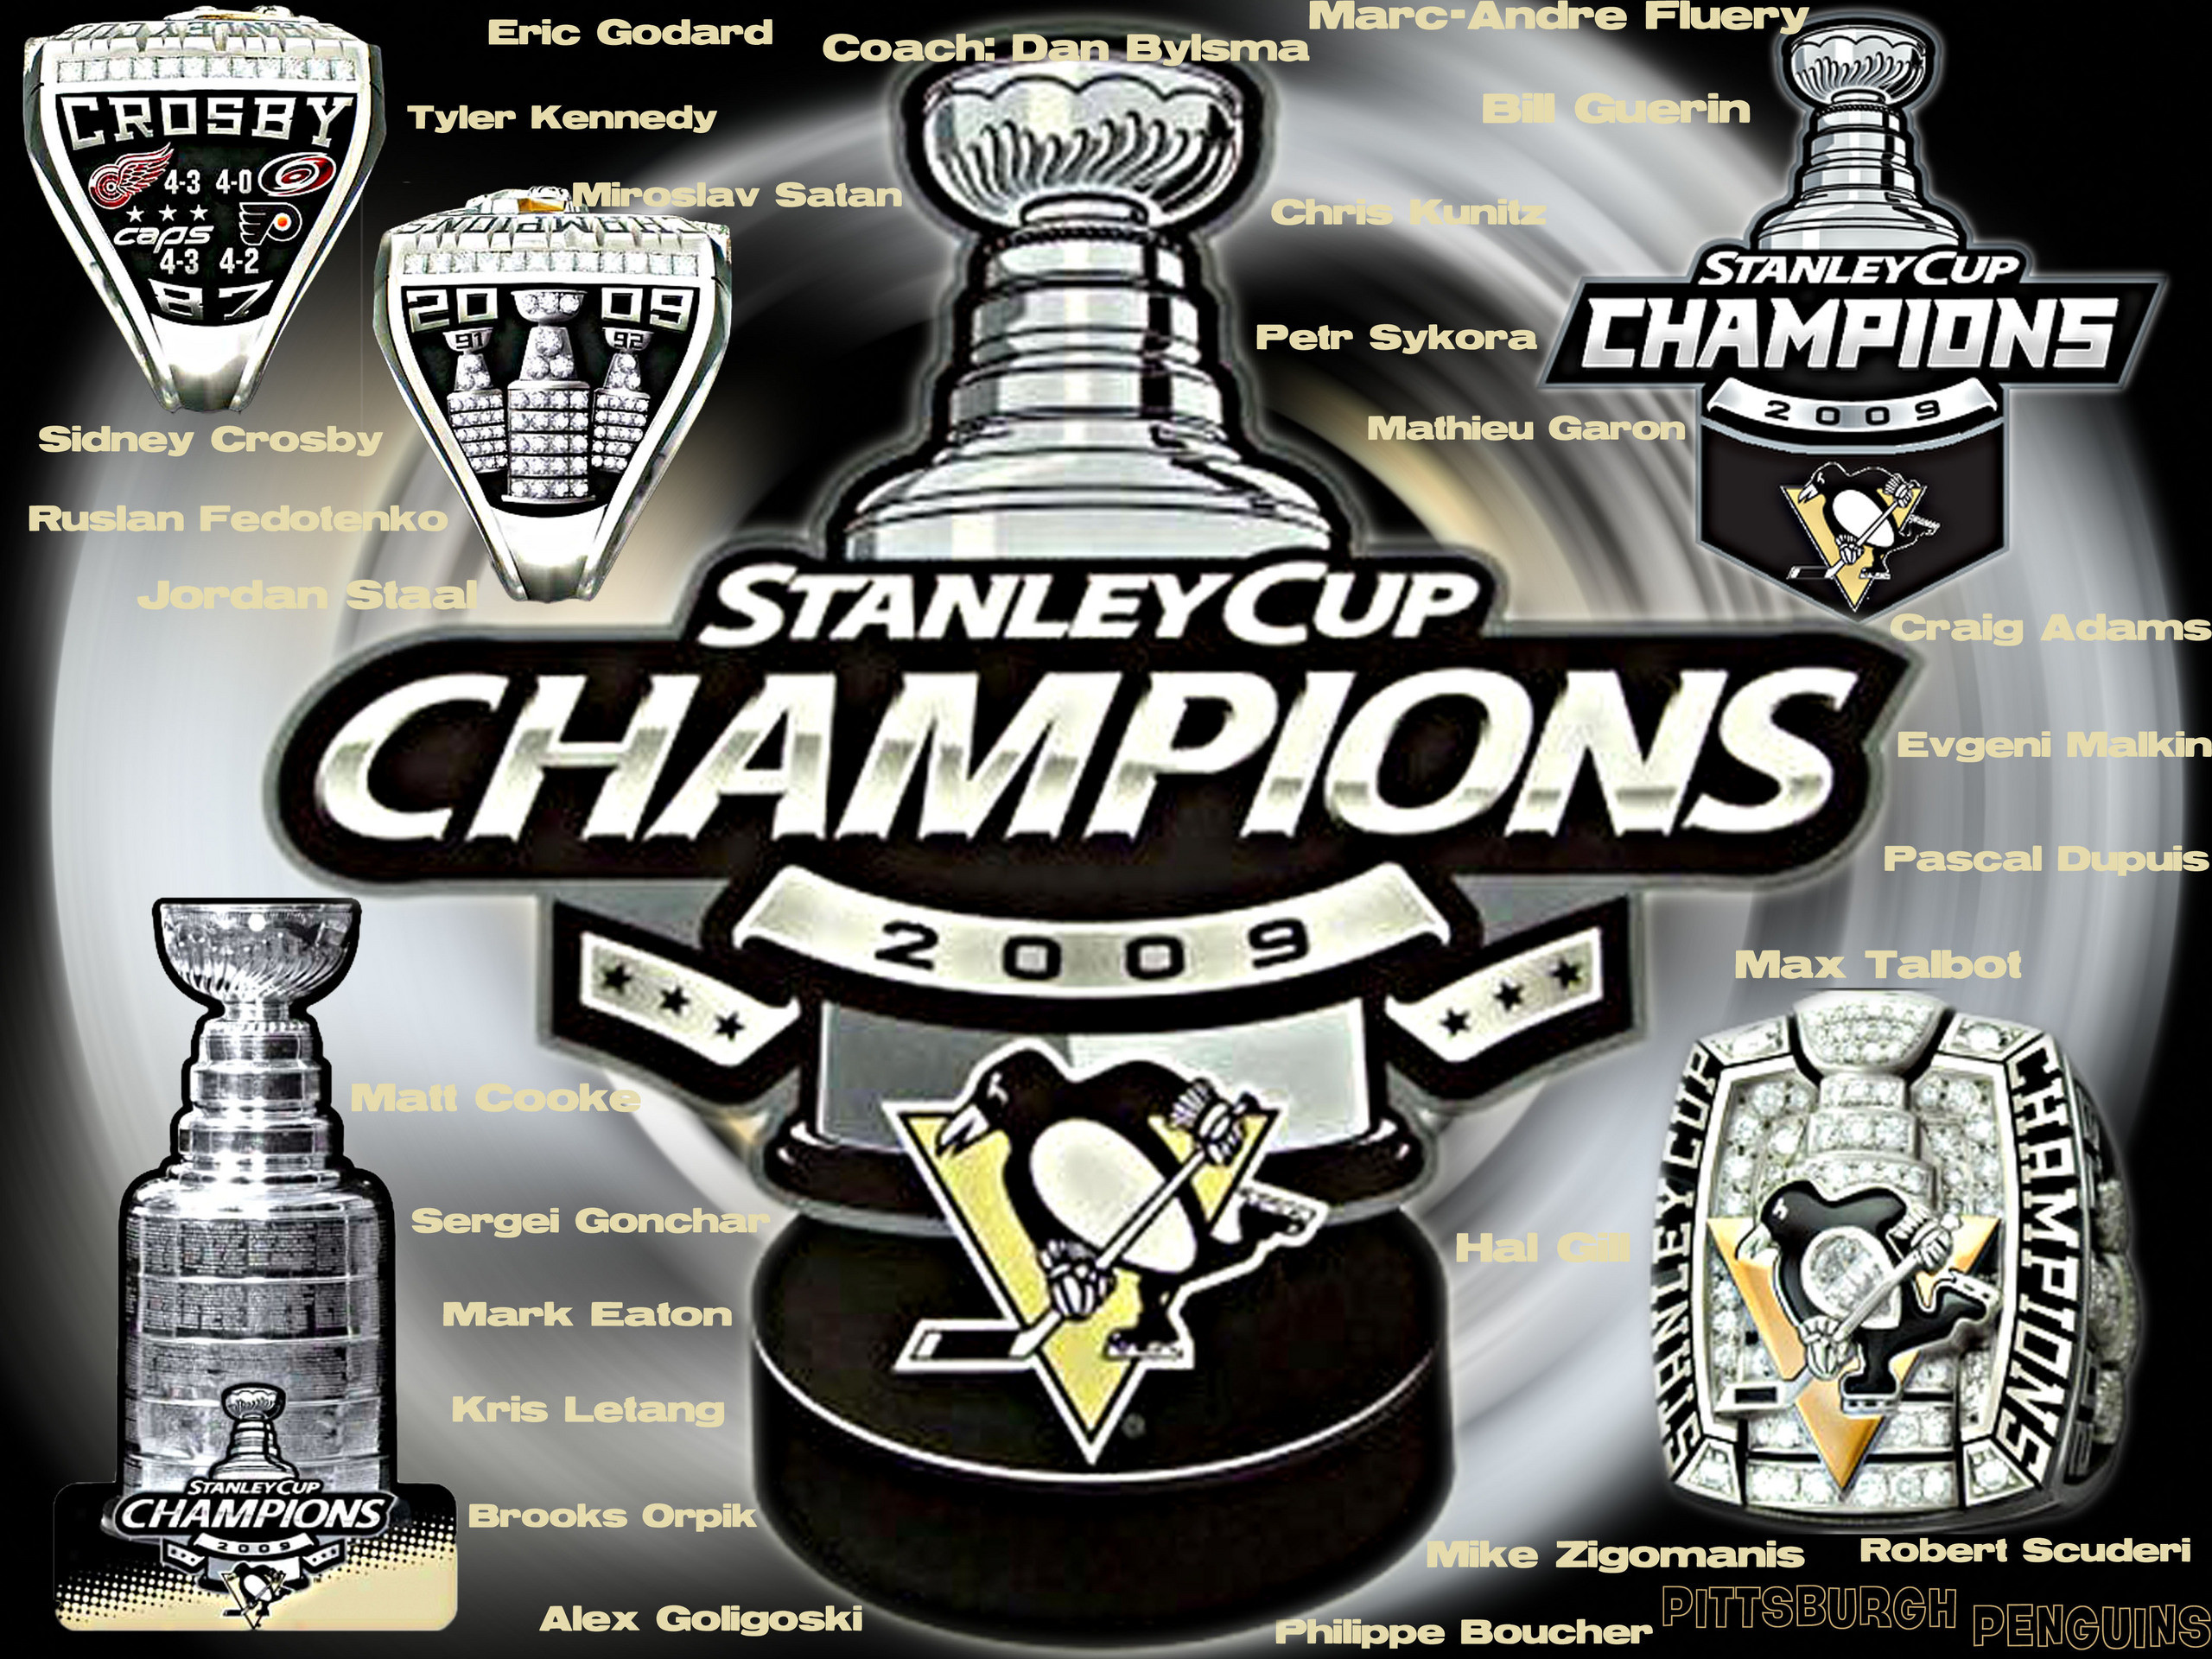 2560x1920 Pittsburgh Penguins images 2009 Stanley Cup Champions HD wallpaper and  background photos